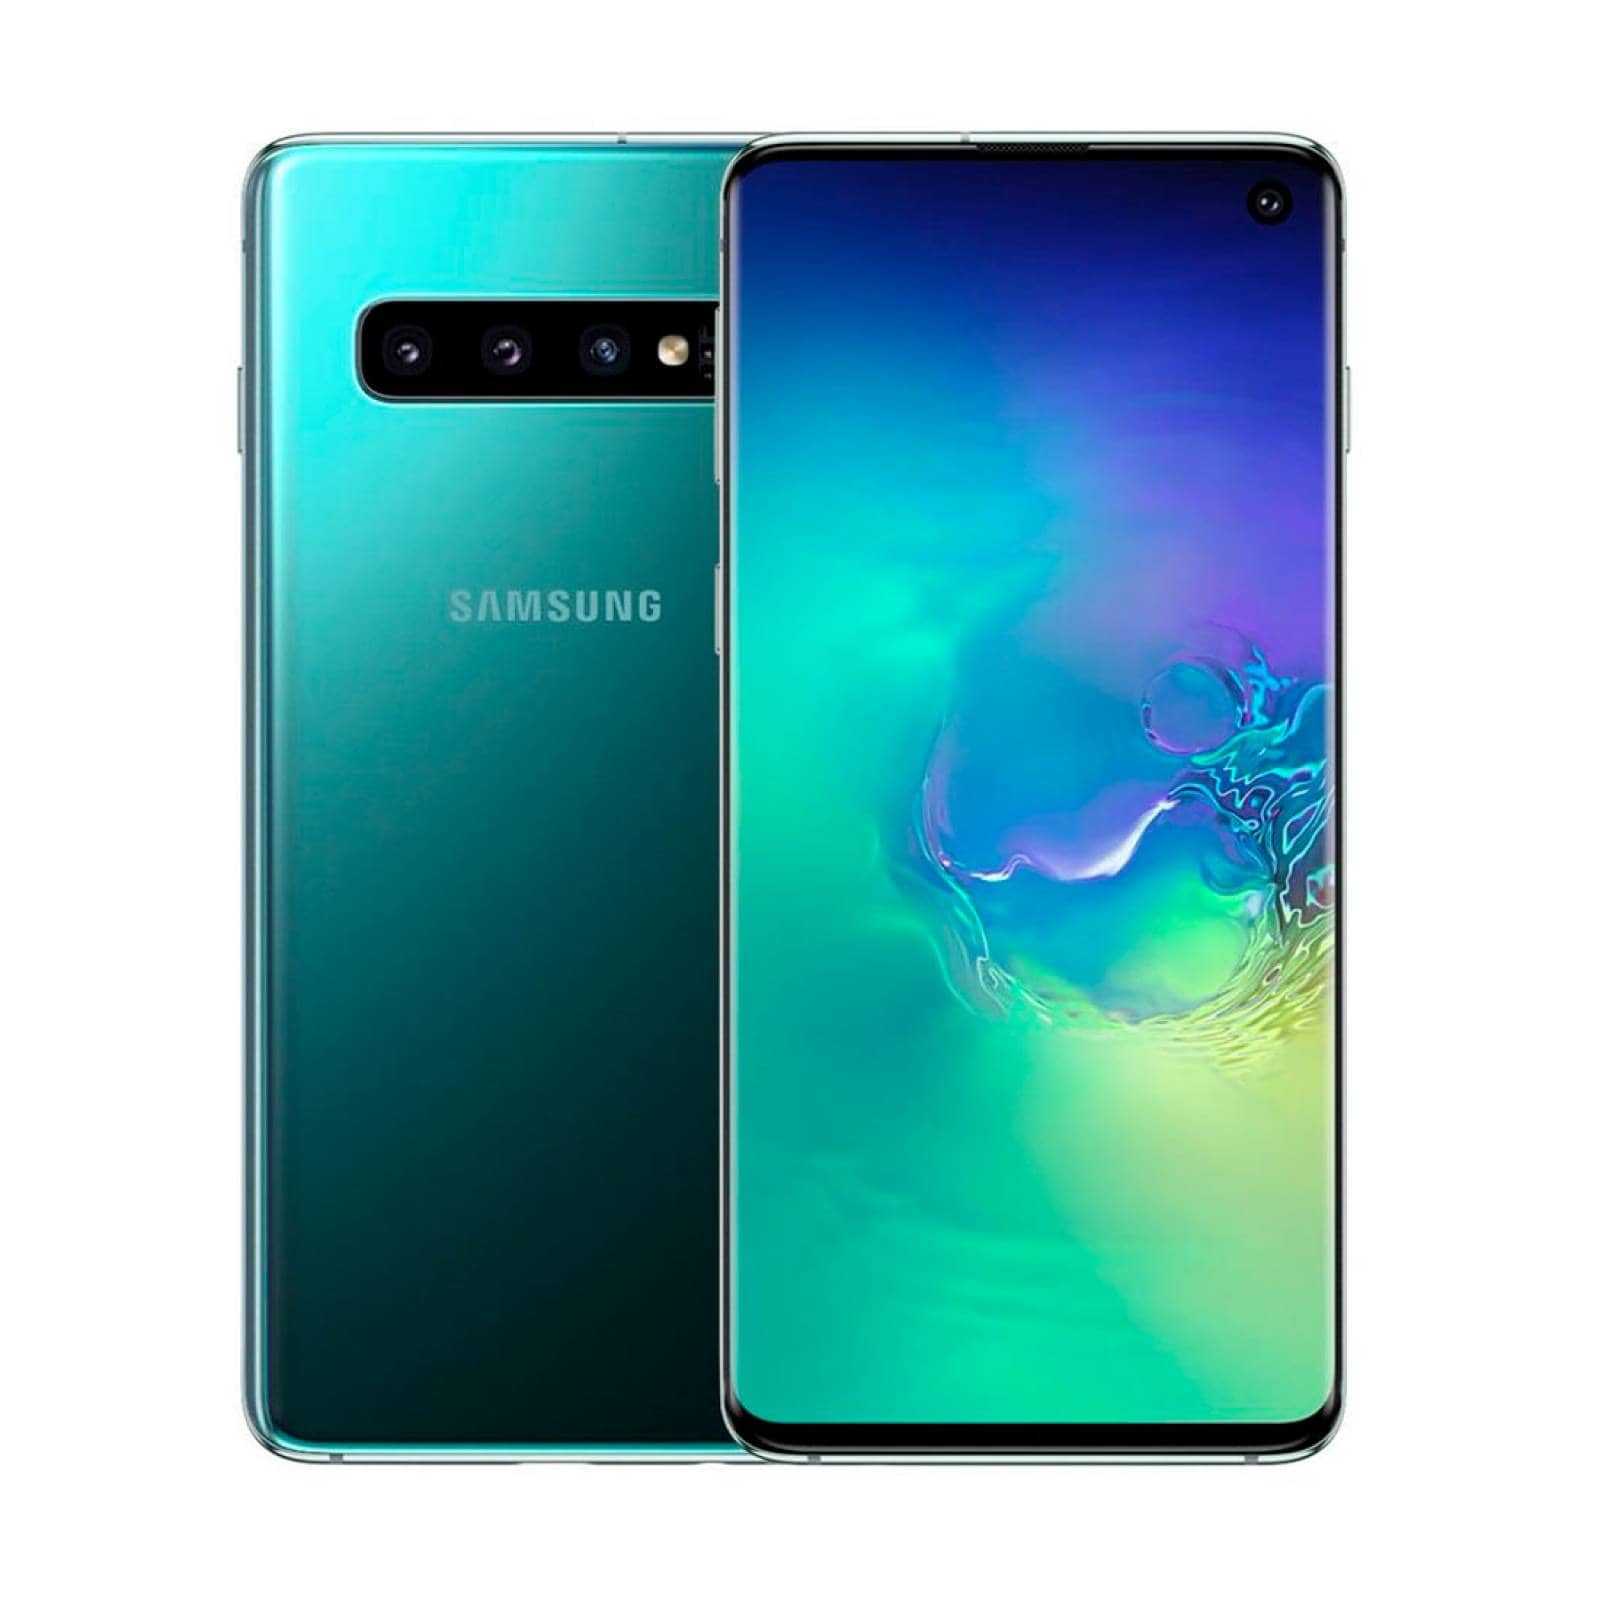 Samsung Galaxy S10 Plus - Hands on with the new Samsung Galaxy S10